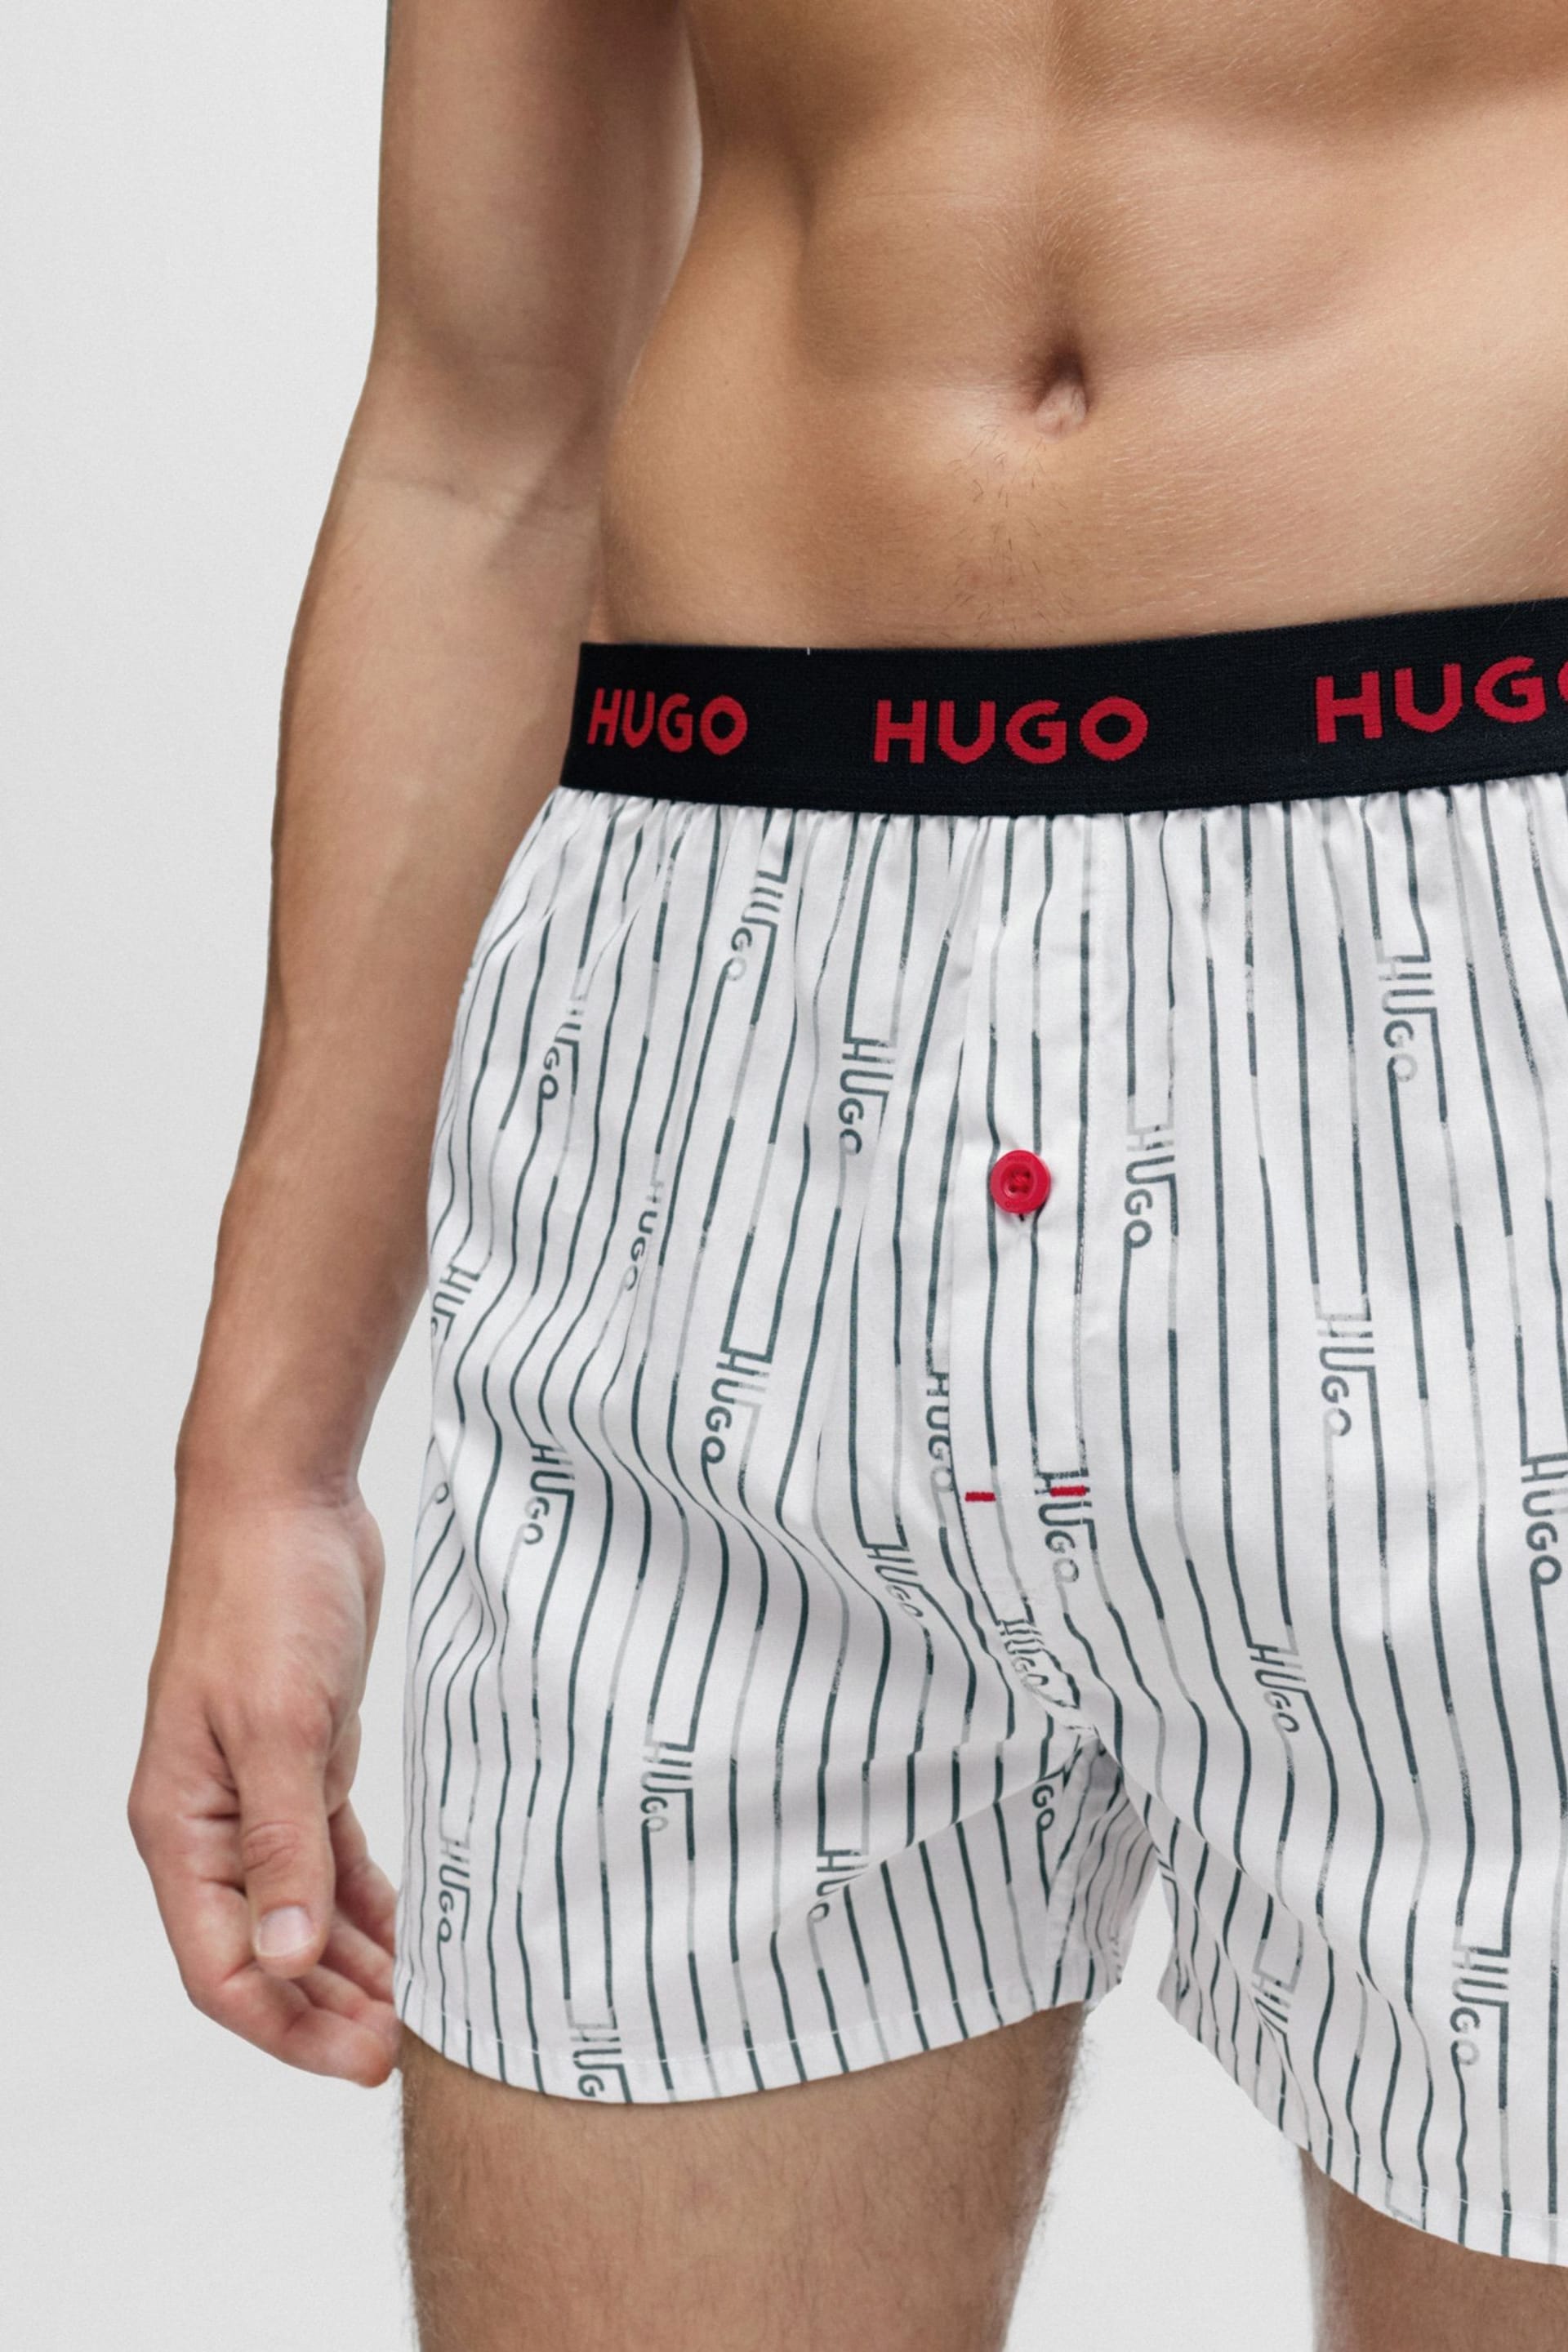 HUGO Green Cotton Boxers Shorts With Logo Waistbands 3 Pack - Image 6 of 6